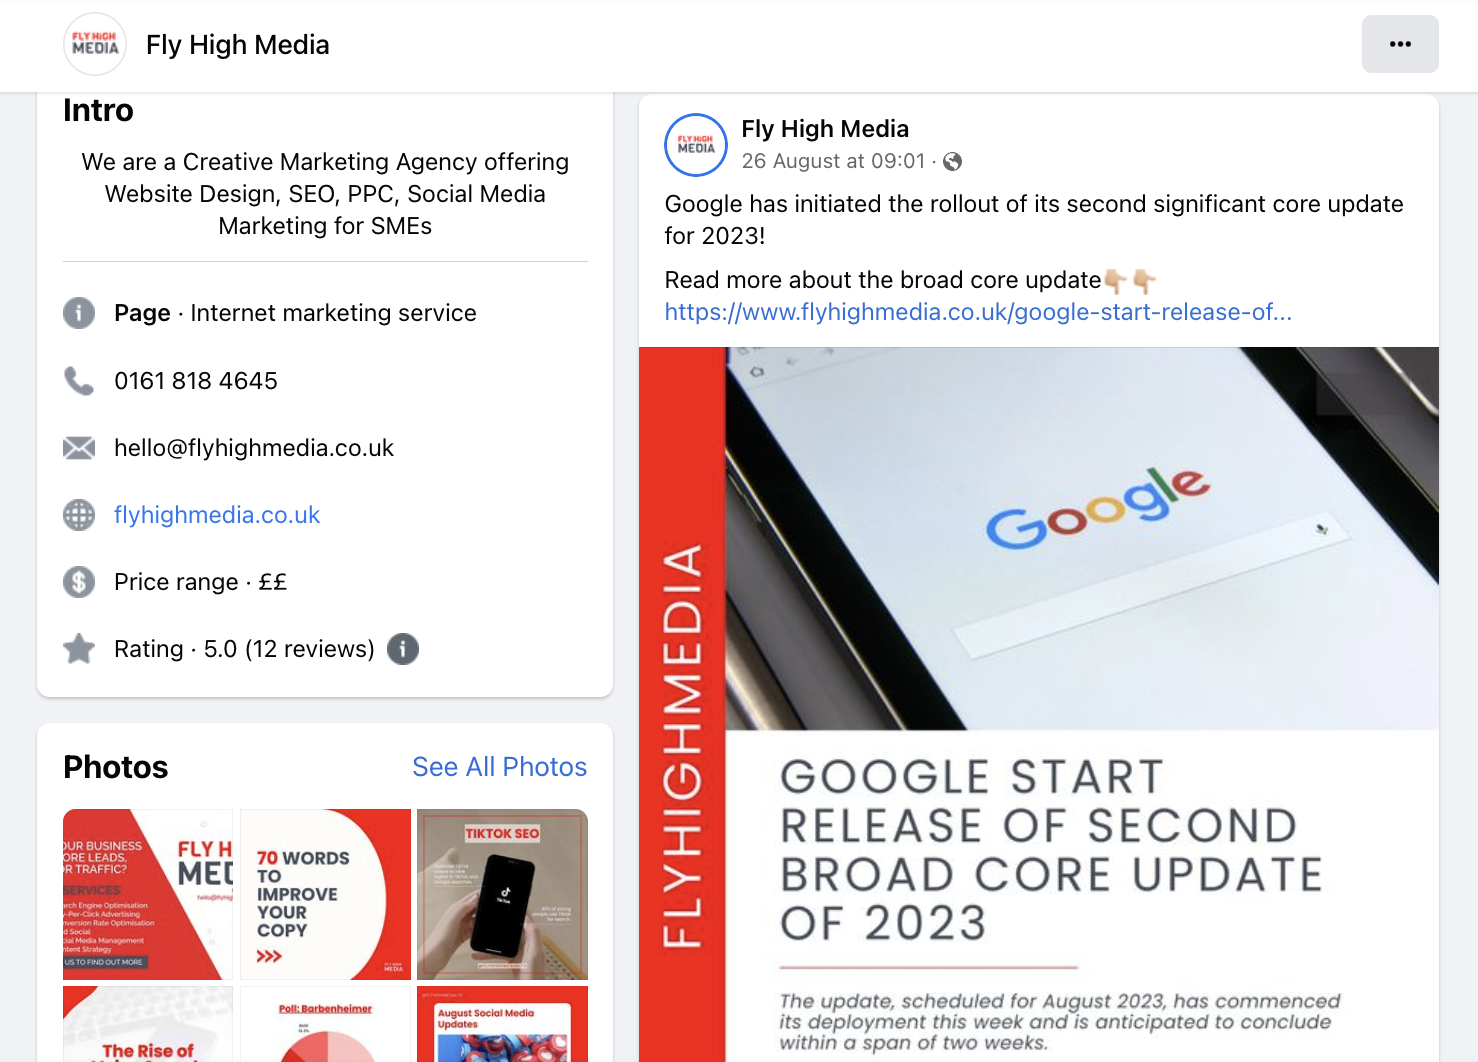 Fly High Media Facebook Post about the second broad core Google update 2023